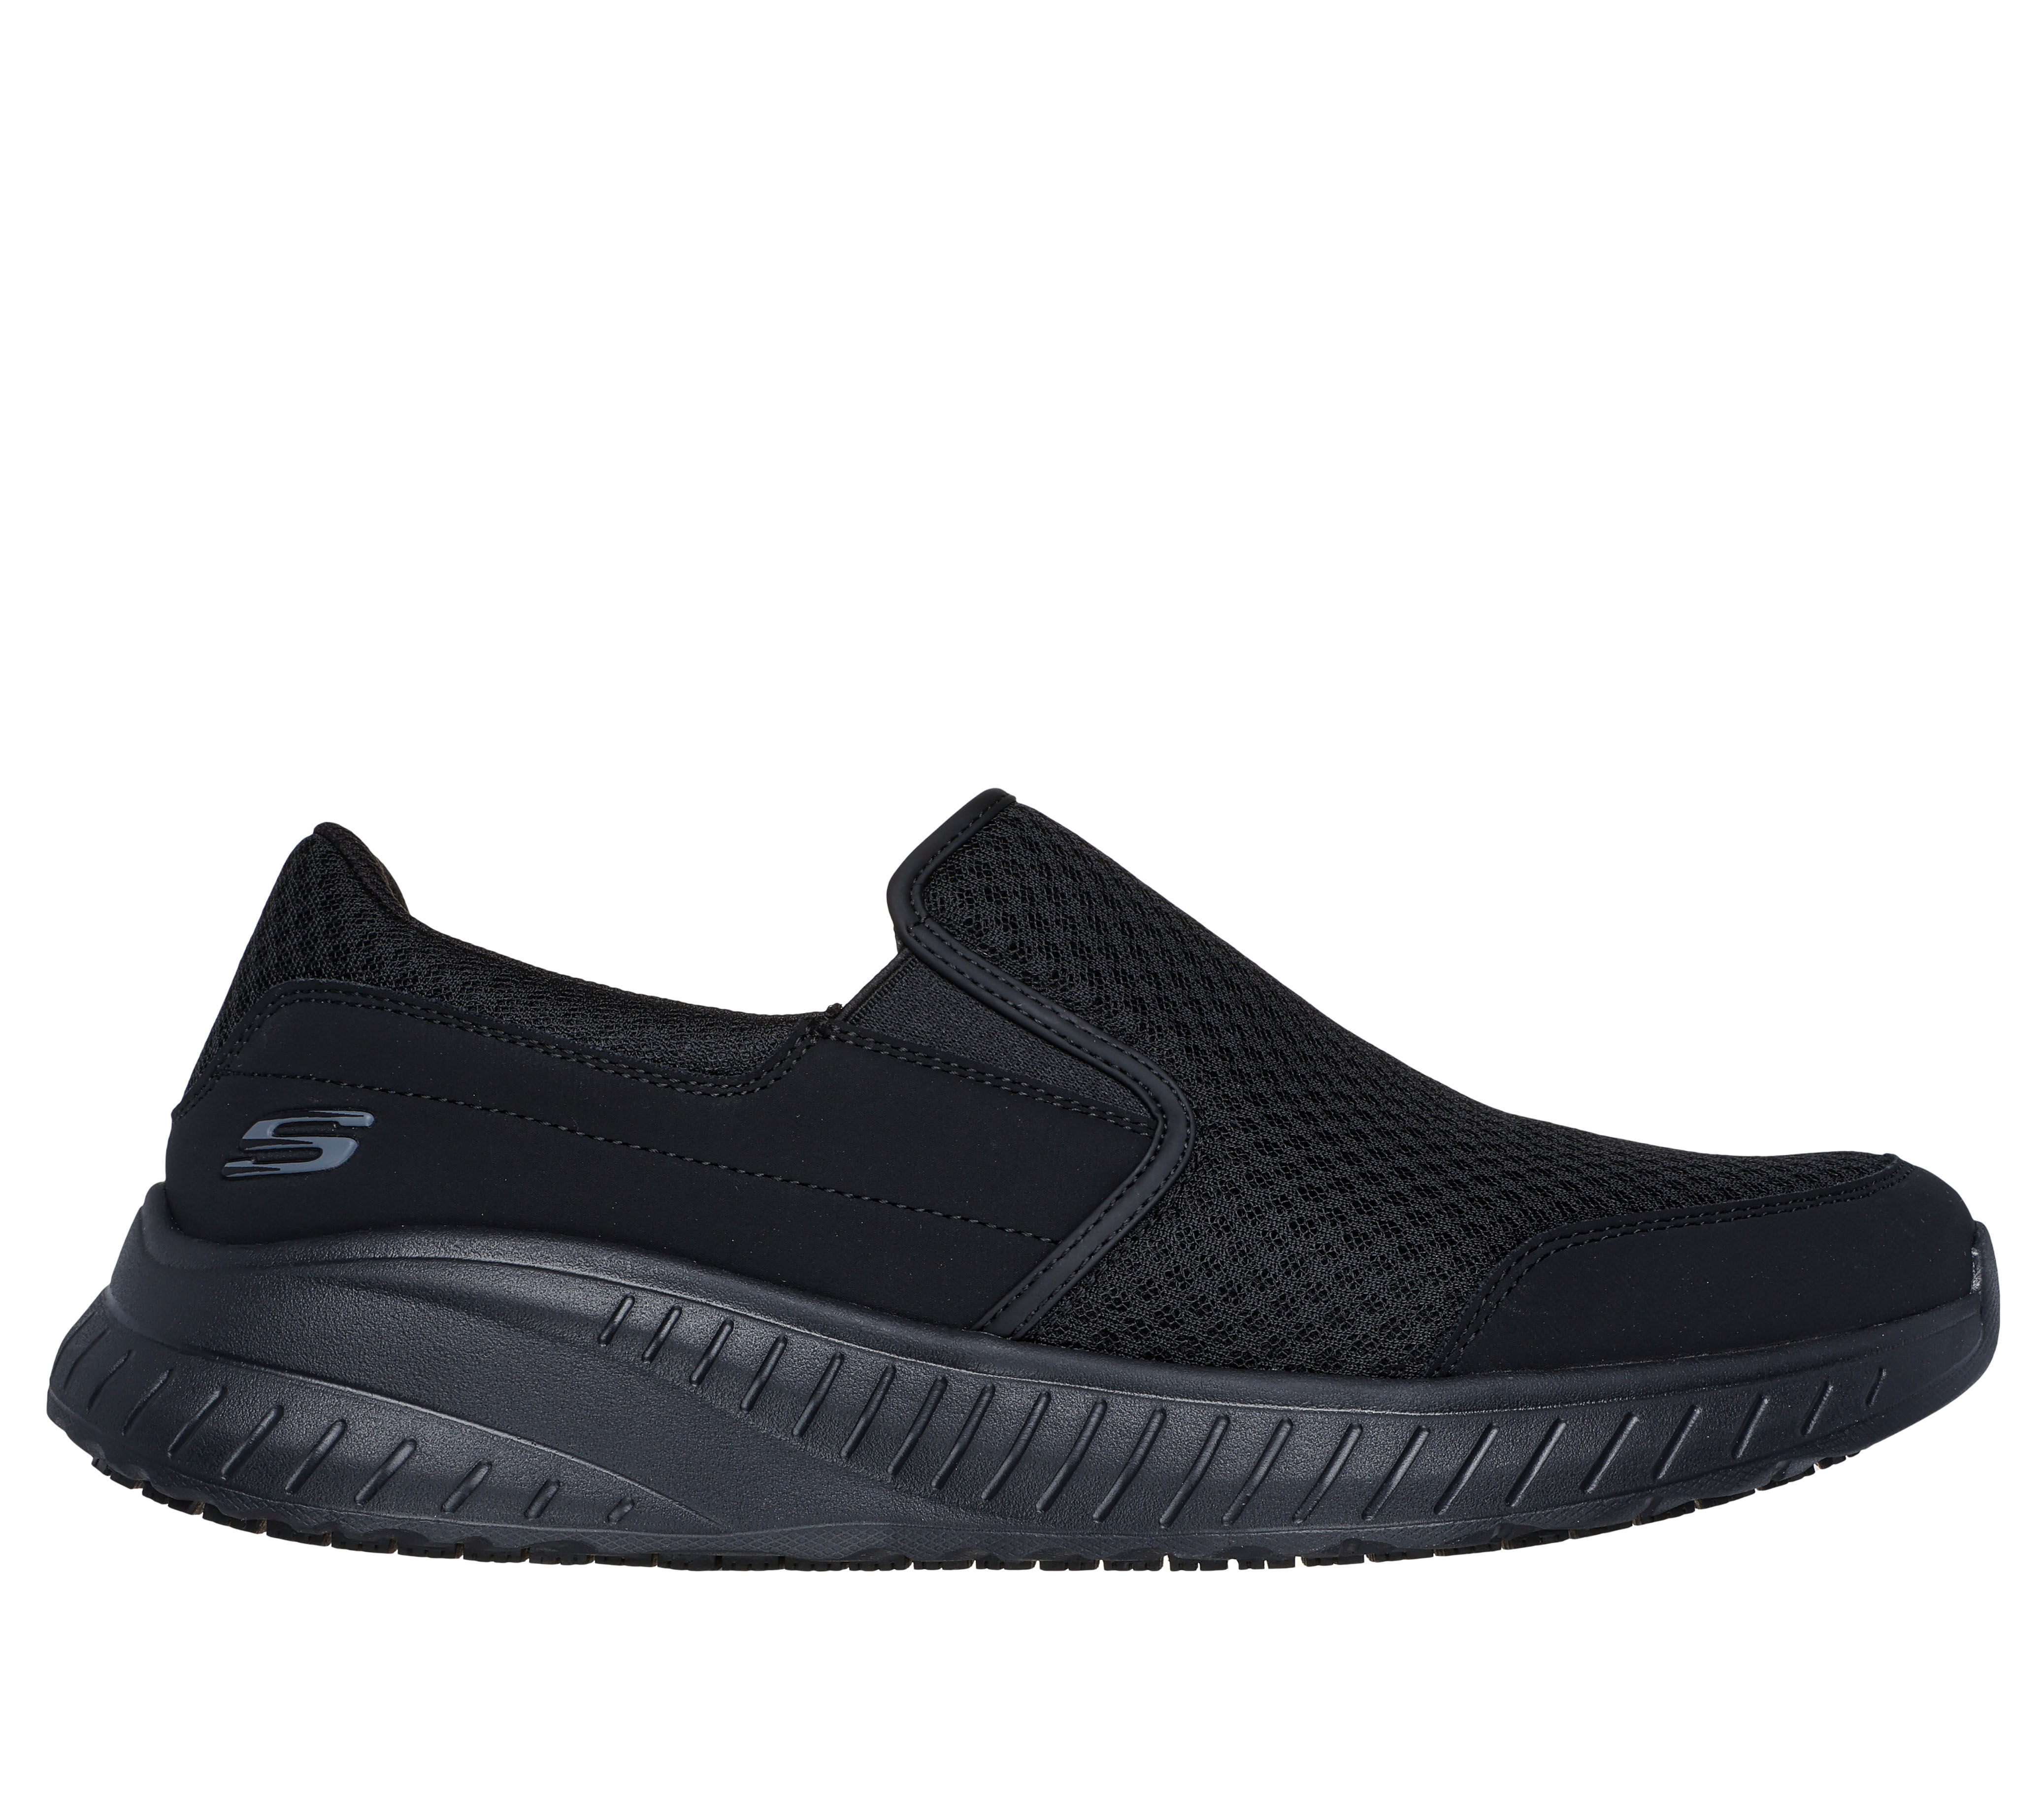 Shop the Work Relaxed Fit: Squad Chaos SR - Urgran | SKECHERS CA